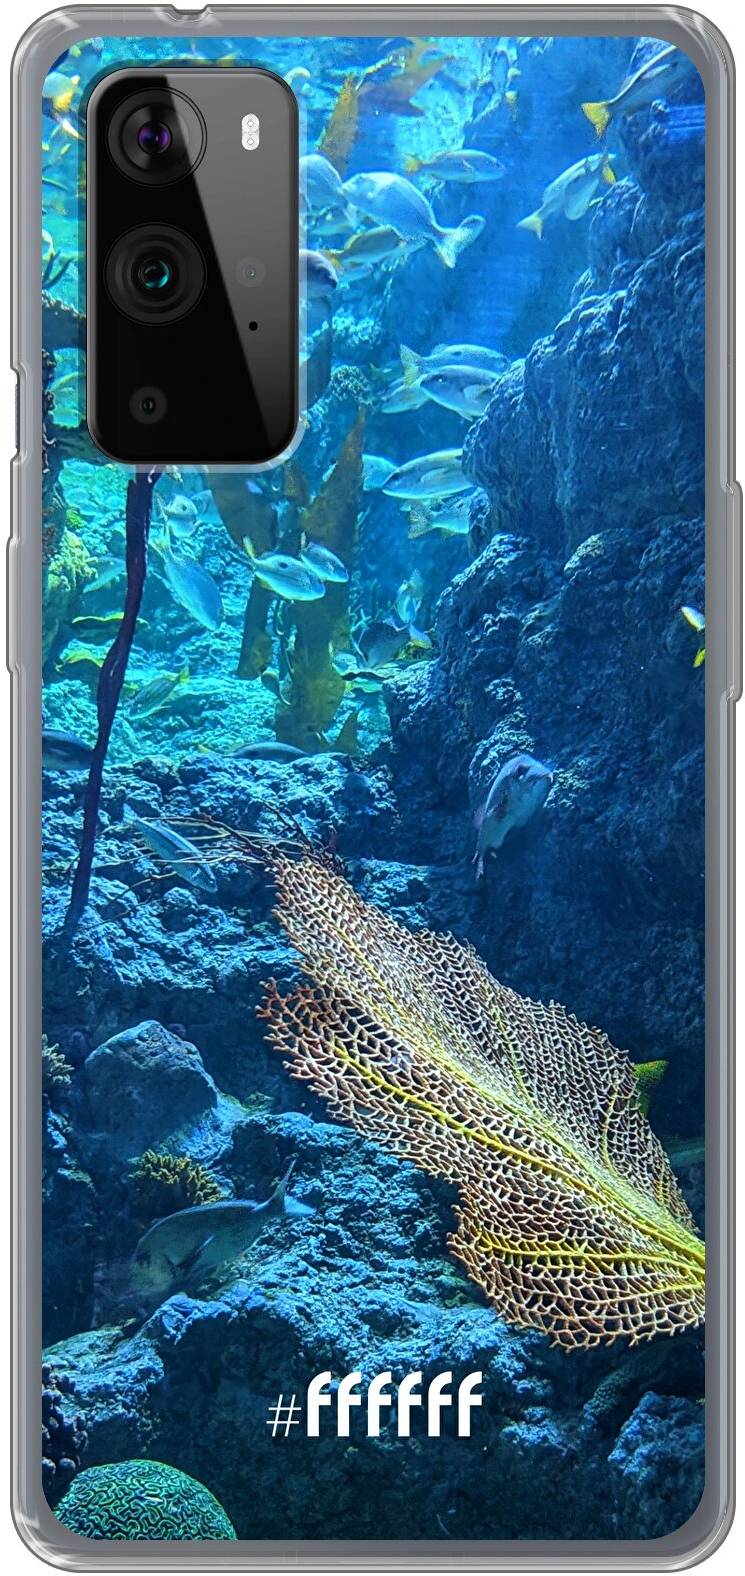 Coral Reef 9 Pro